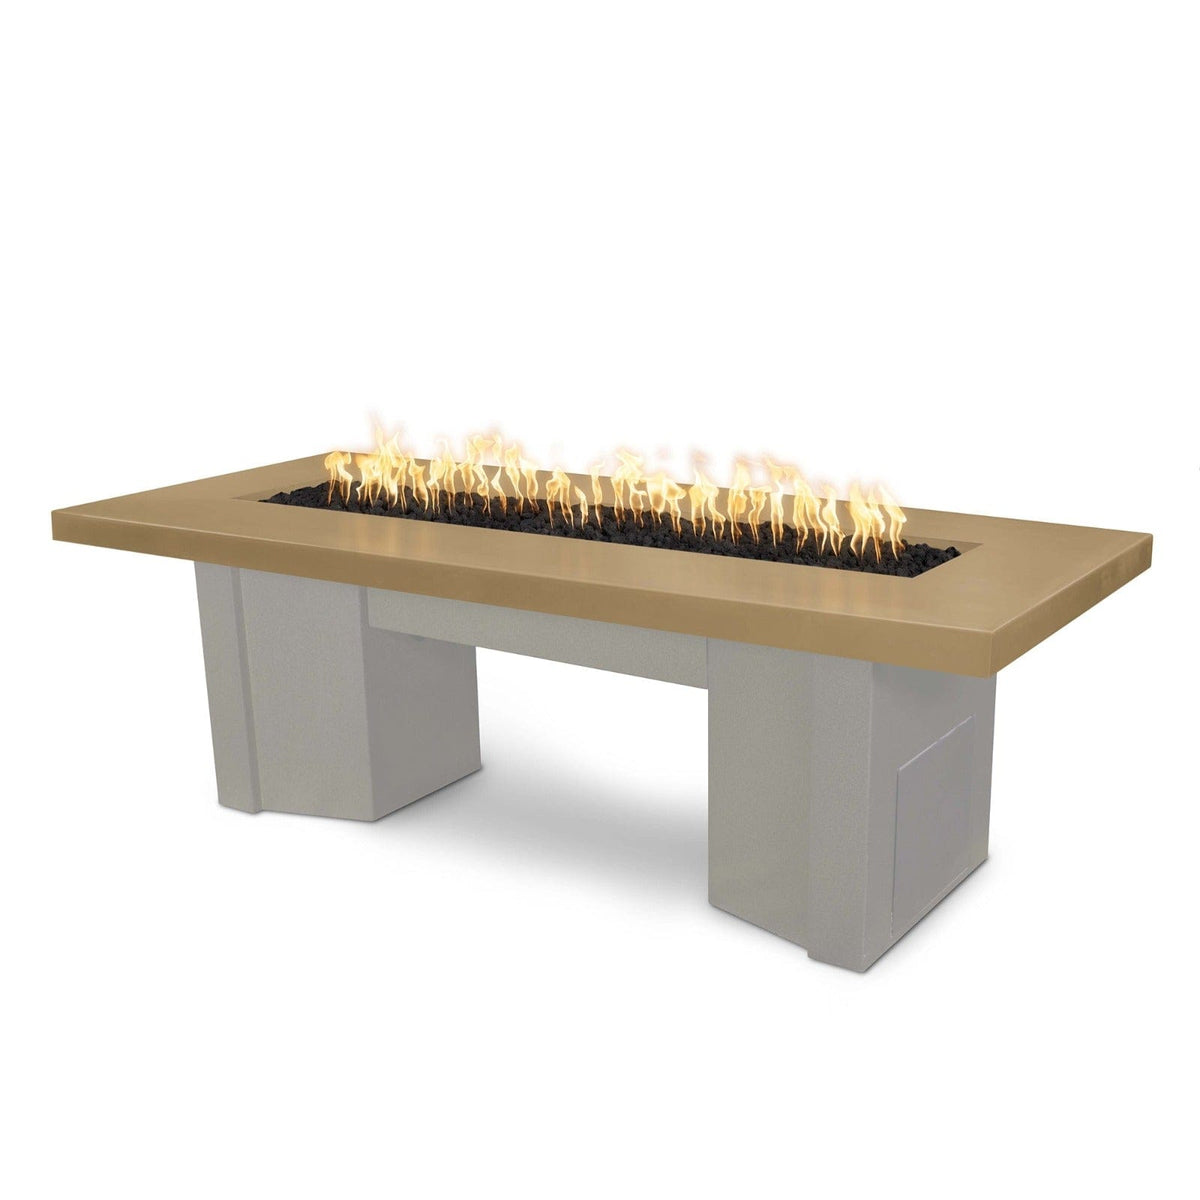 The Outdoor Plus Fire Features Brown (-BRN) / Pewter Powder Coated Steel (-PEW) The Outdoor Plus 78&quot; Alameda Fire Table Smooth Concrete in Natural Gas - Flame Sense System with Push Button Spark Igniter / OPT-ALMGFRC78FSEN-NG